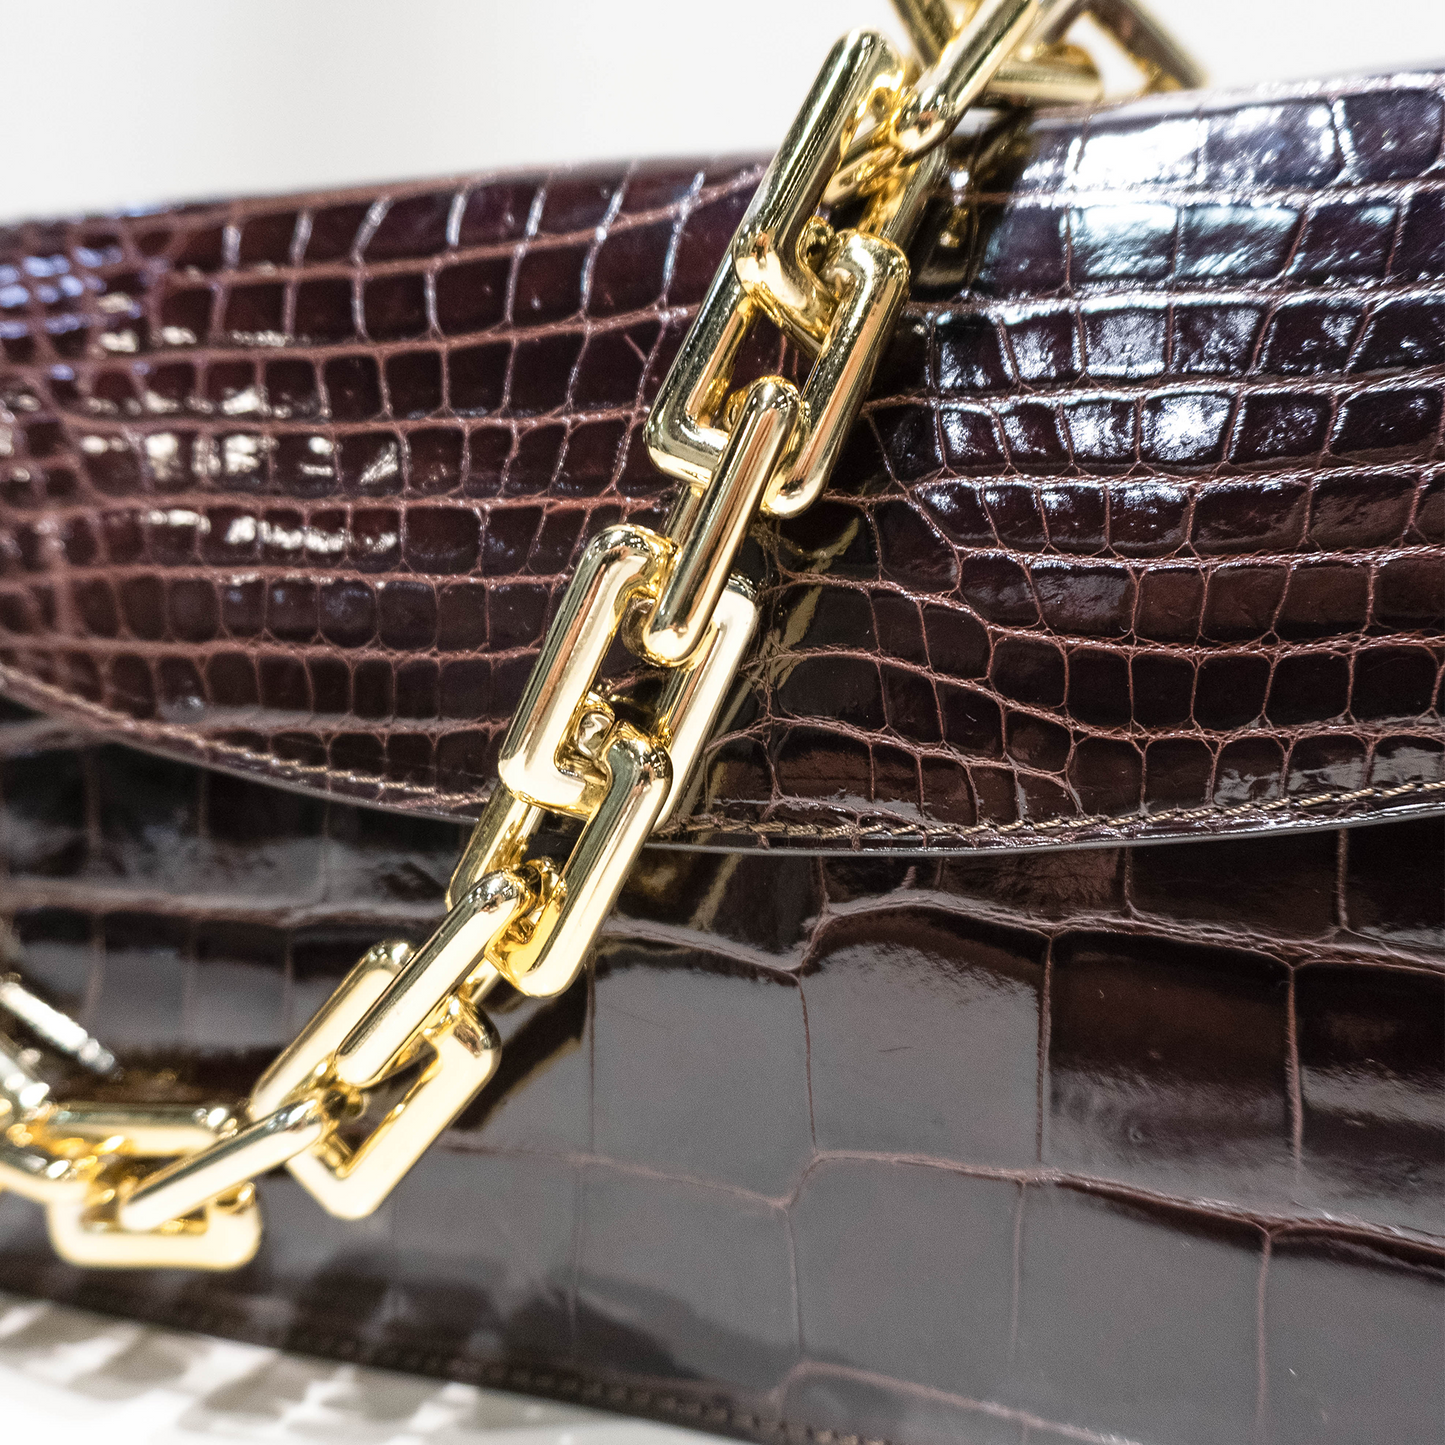 Half Moon Standing Clutch in Shiny Chocolate Brown Crocodile Belly Skin